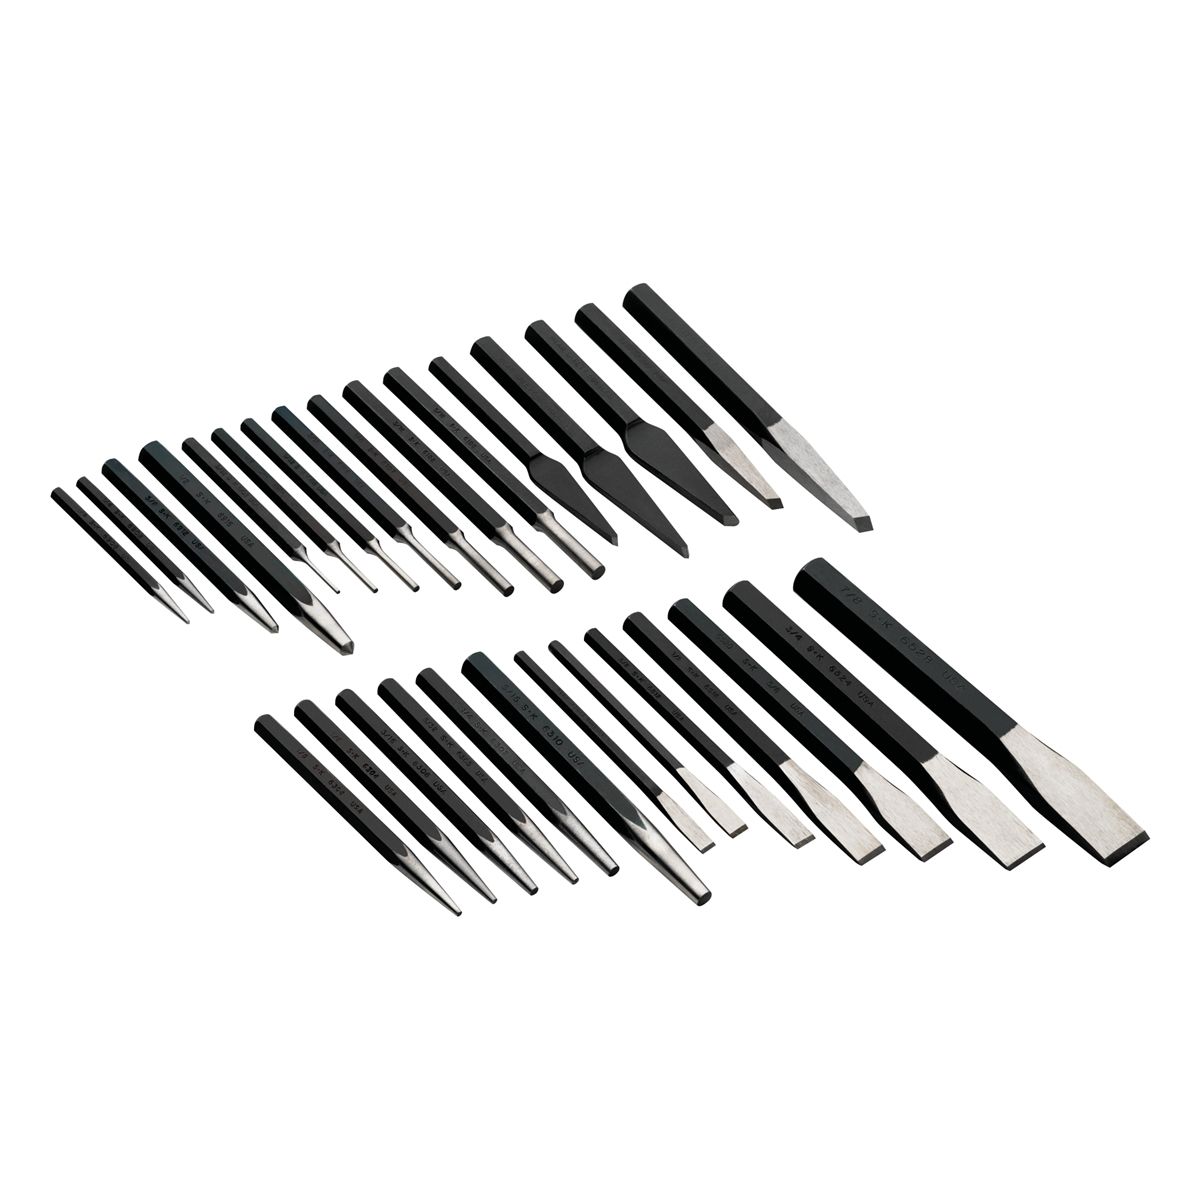 Punch and Chisel Set - 29-Pc